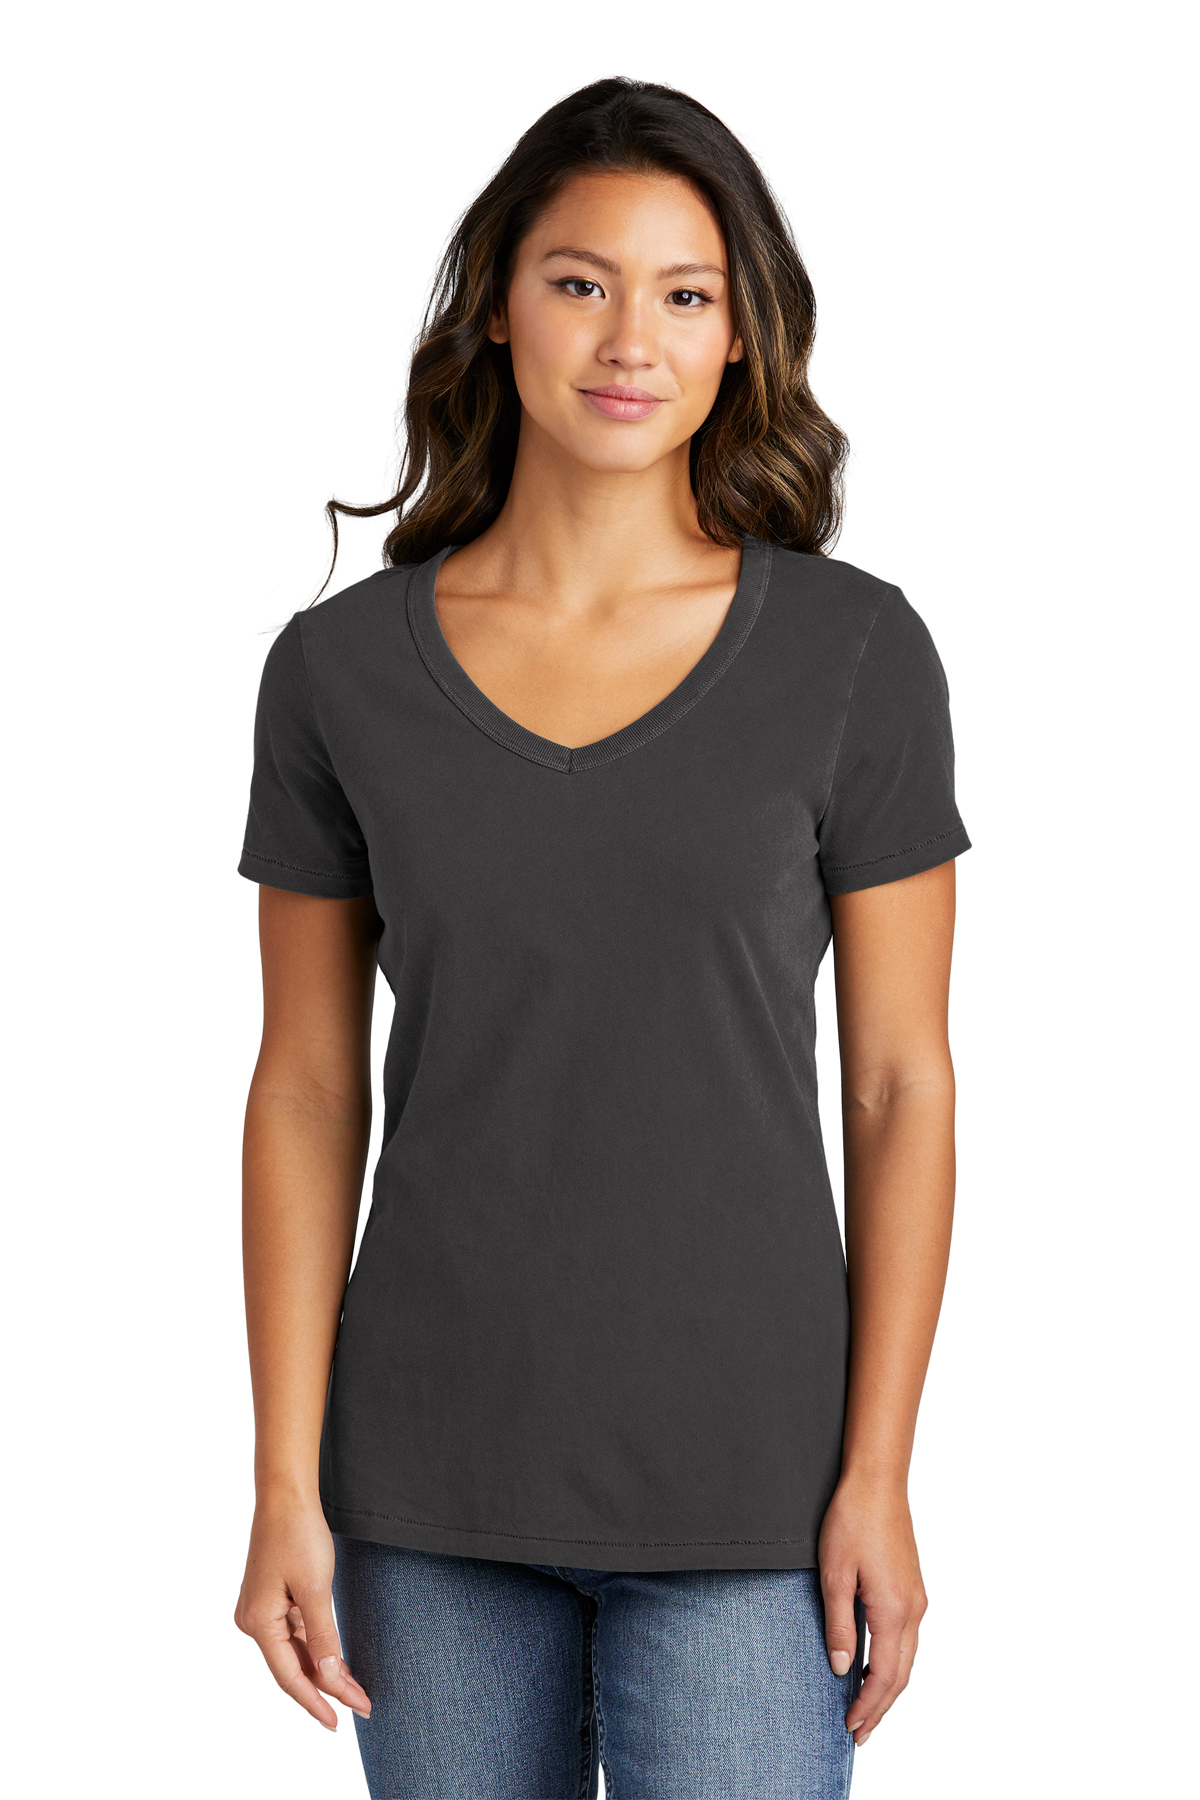 Port & Company Ladies Beach Wash ® Garment-Dyed V-Neck Tee | Product ...